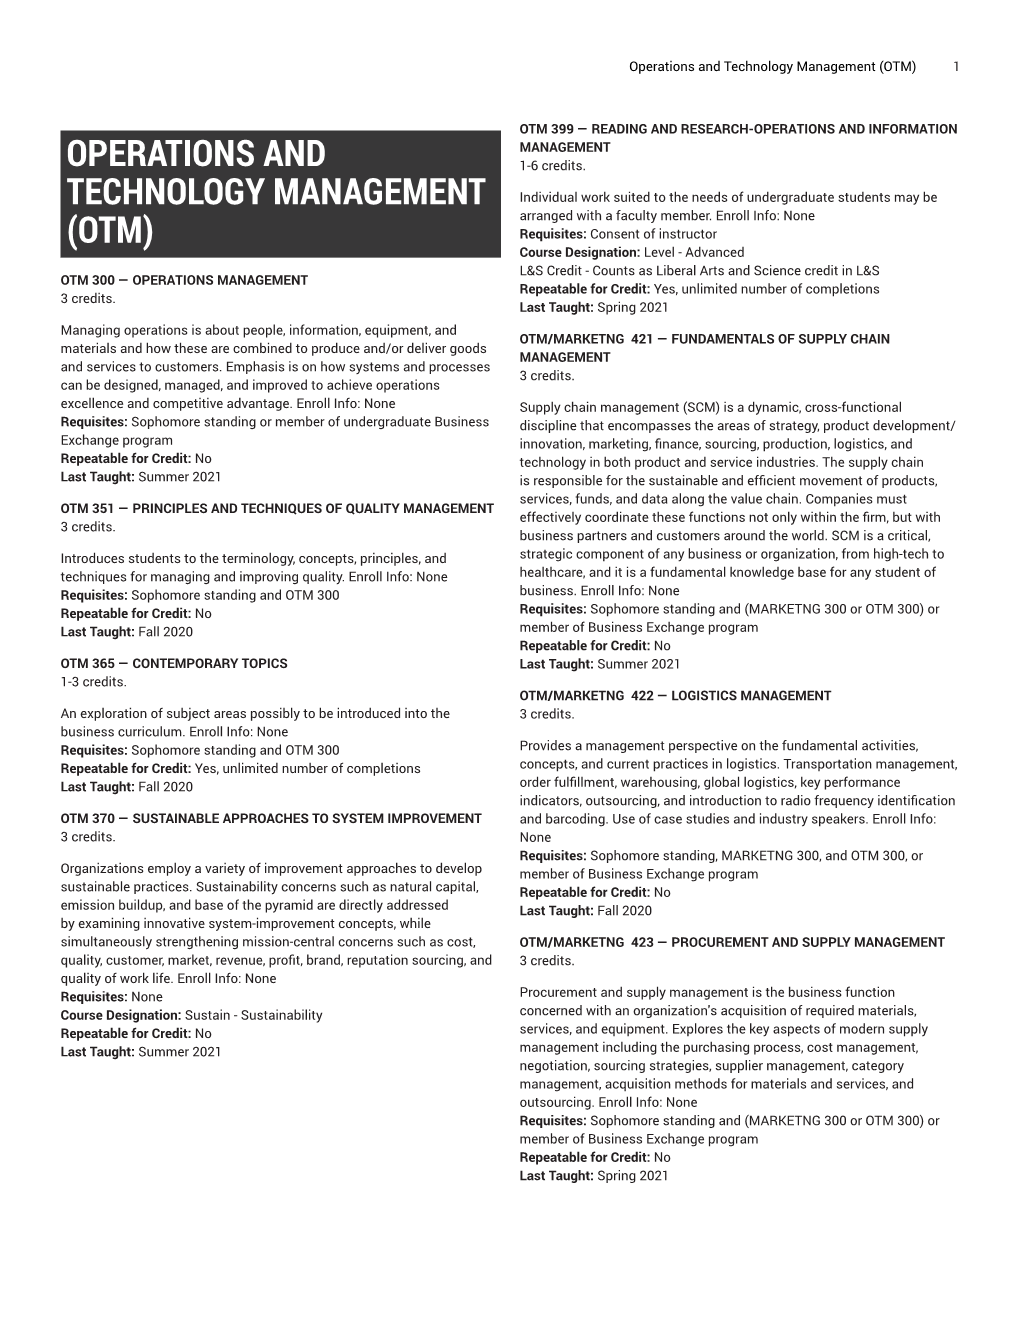 Operations and Technology Management (OTM) 1